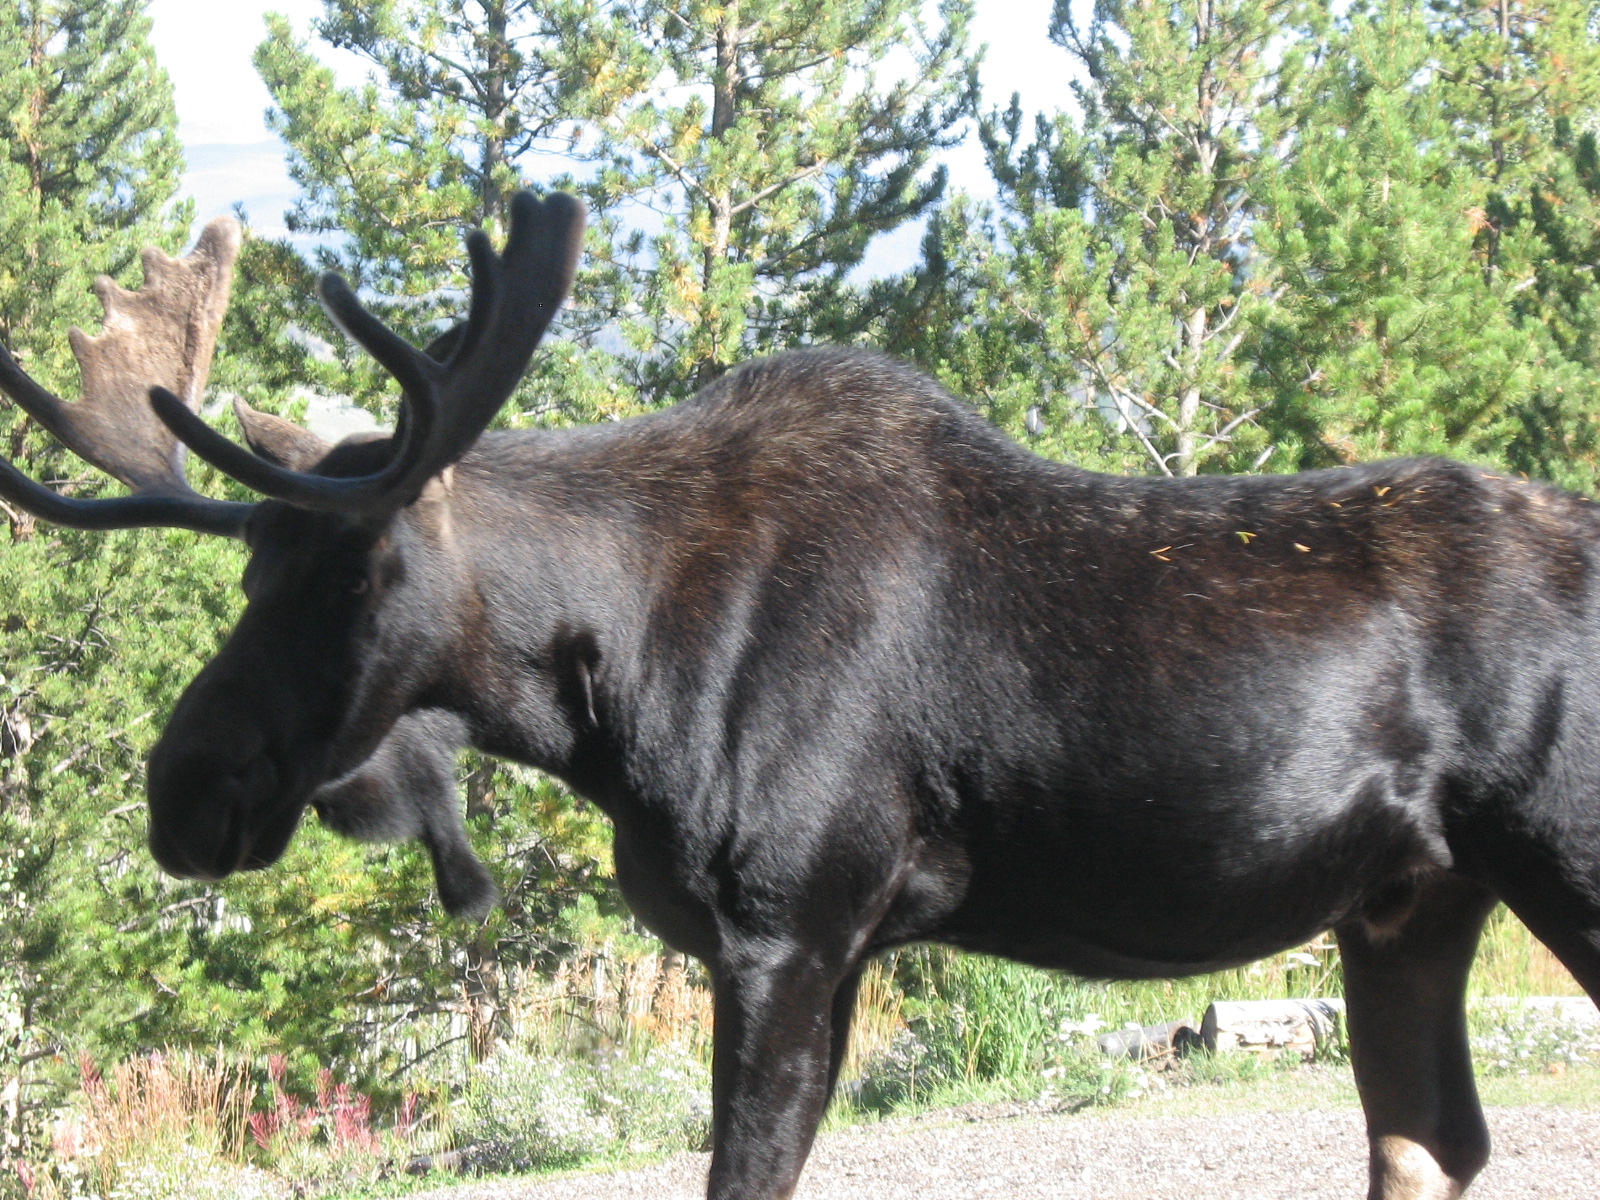 Moose are unpredictable and dangerous, view from a distance.